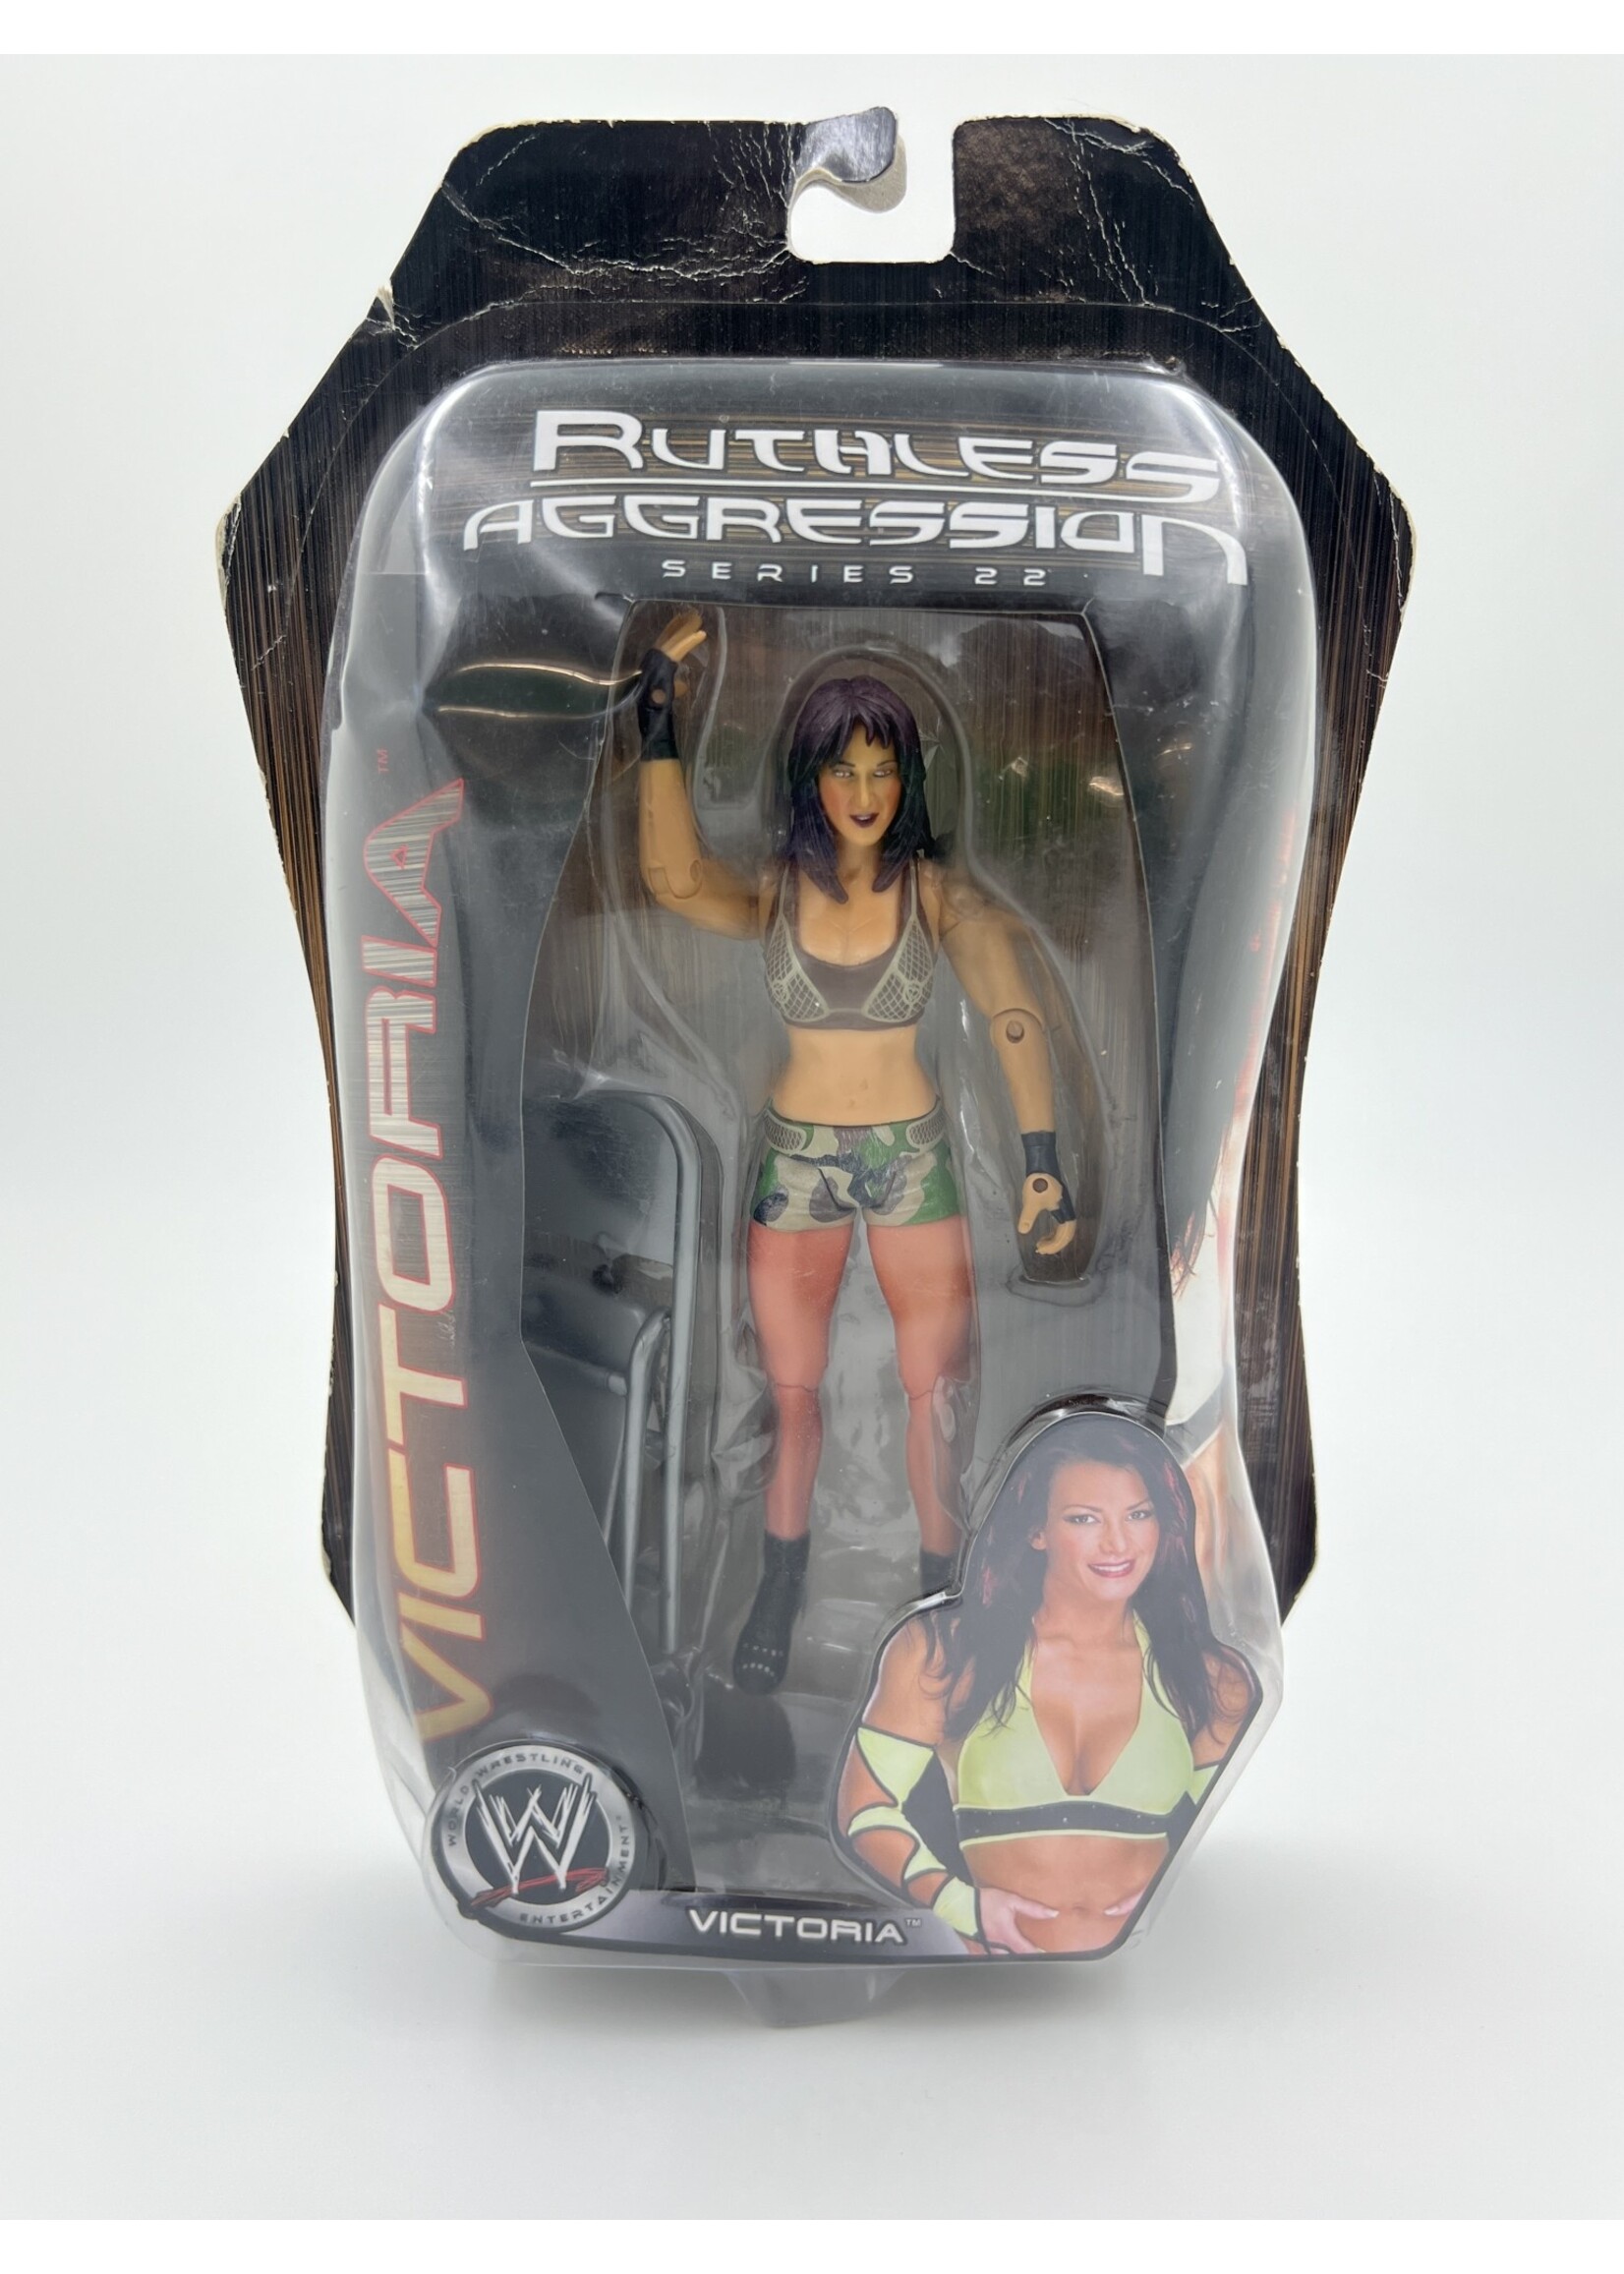 Action Figures Victoria WWE Ruthless Aggression Figure